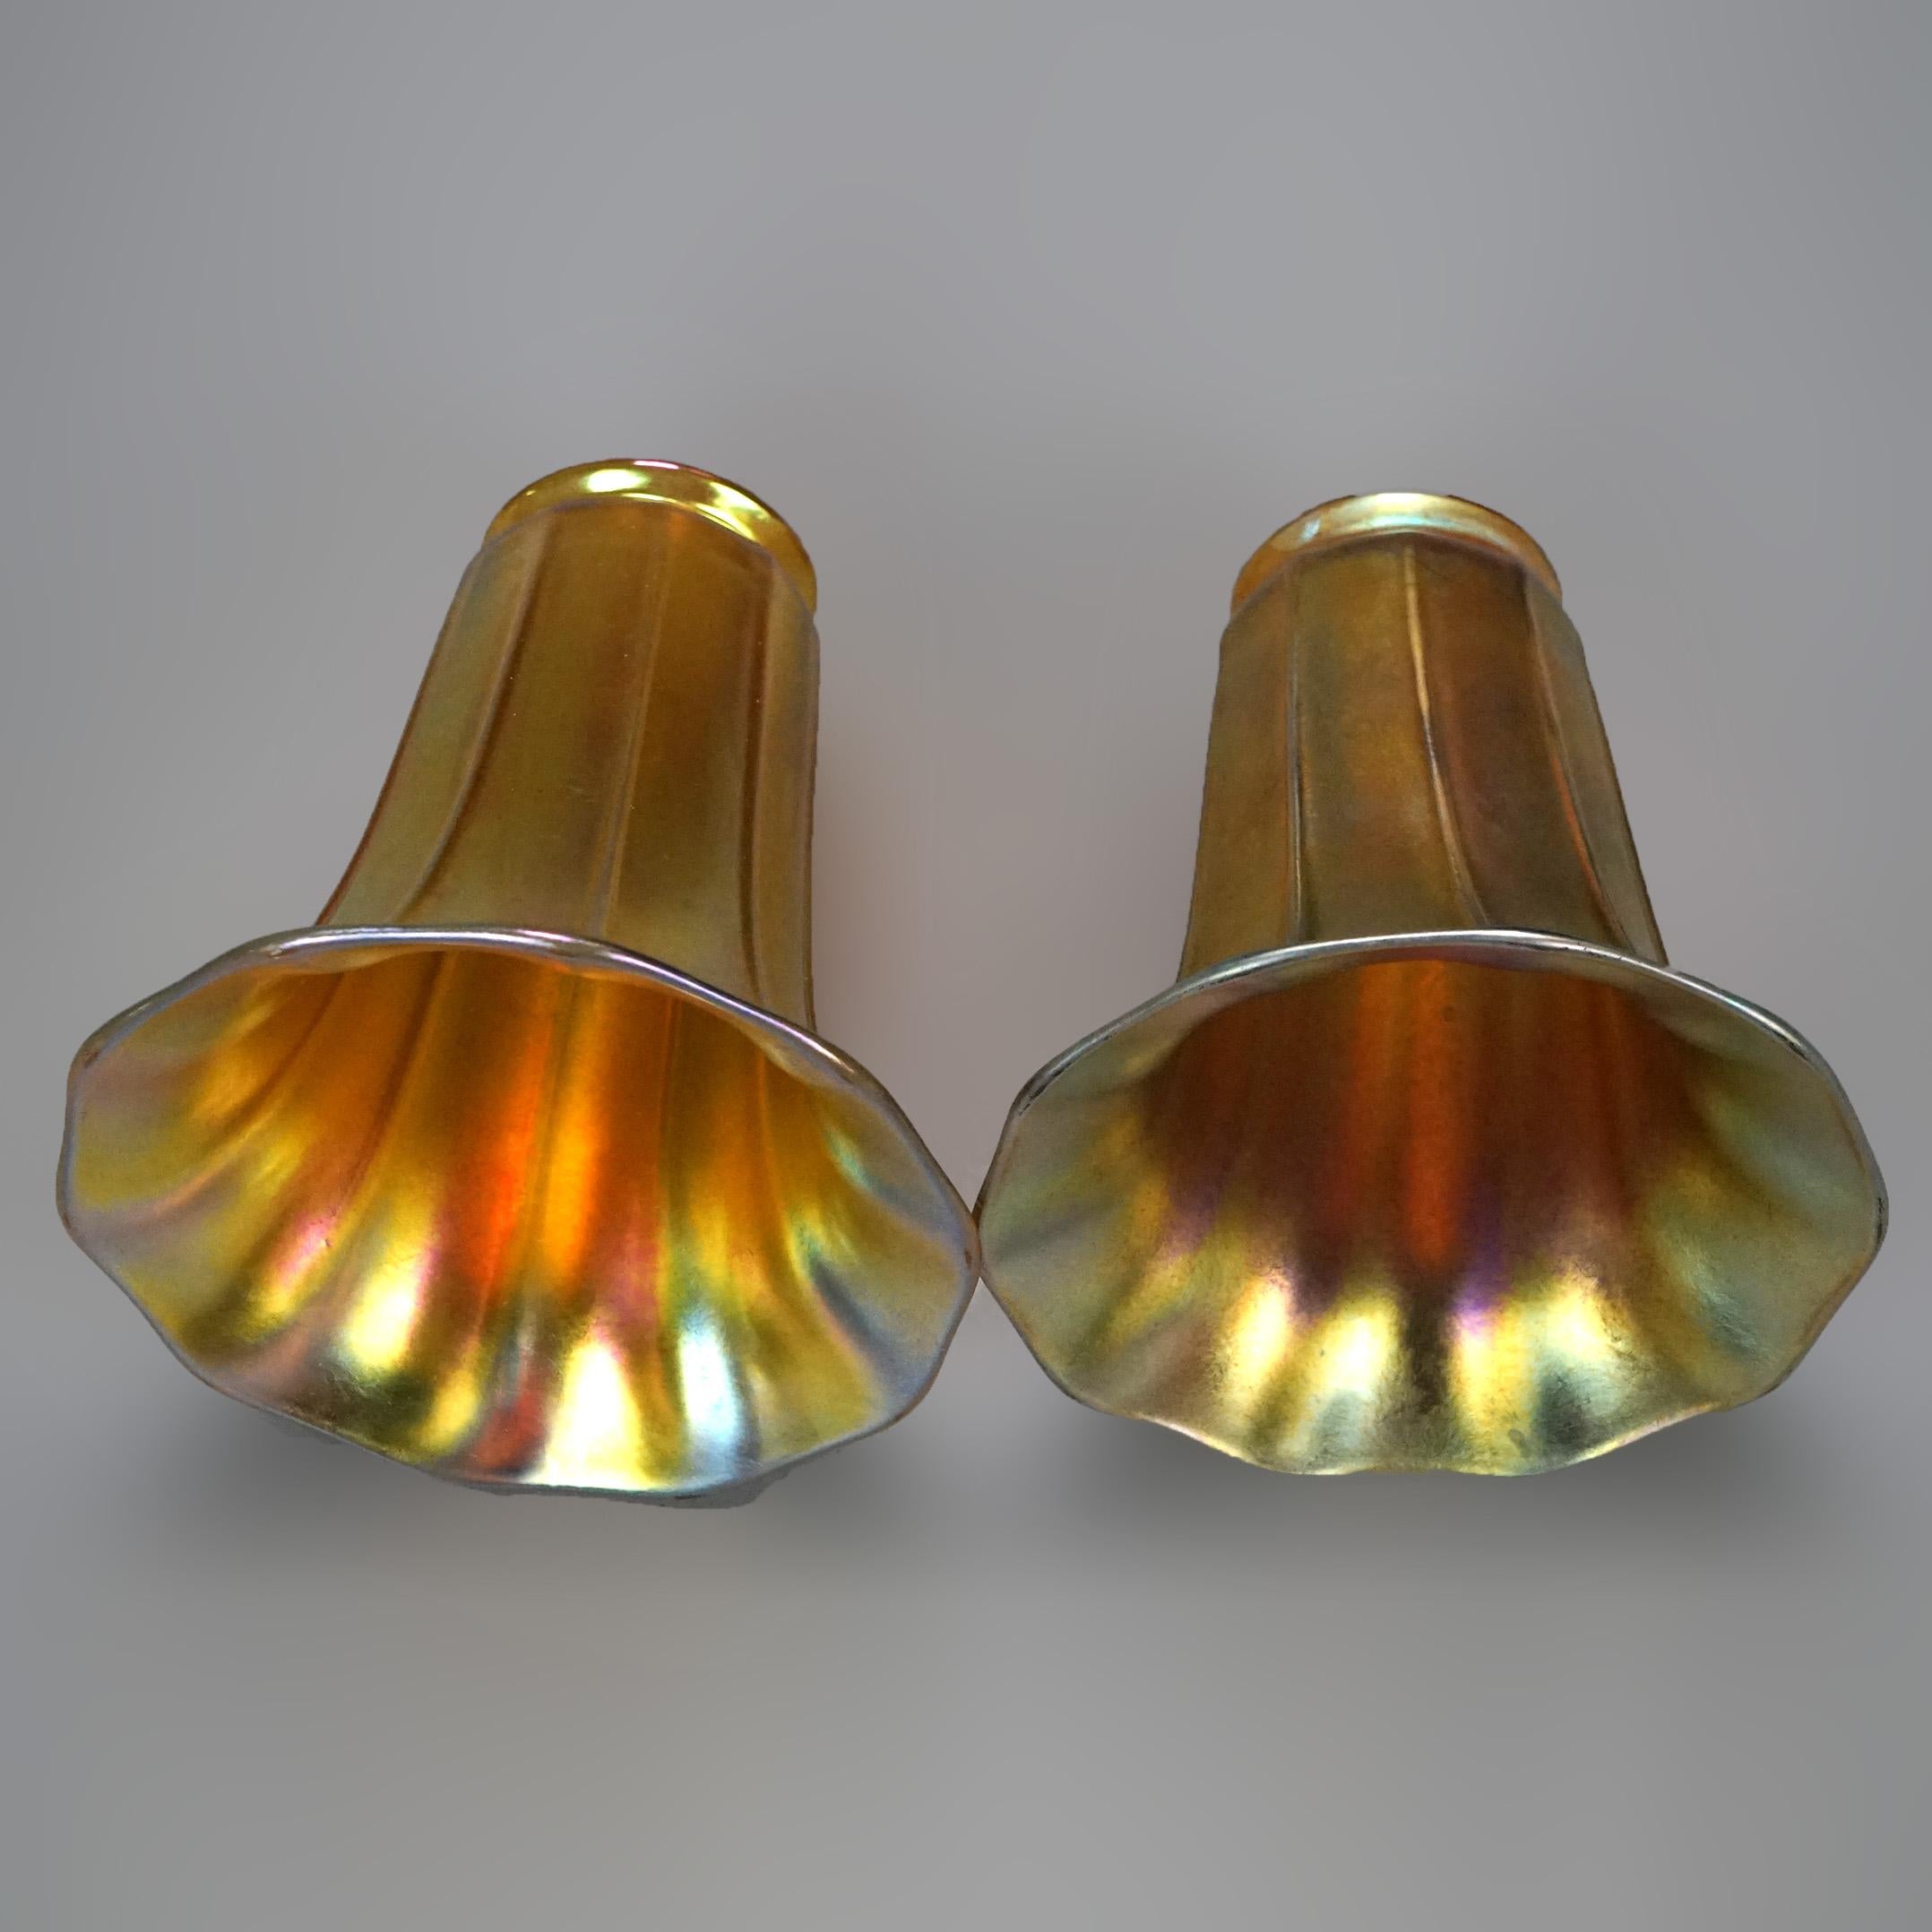 An antique pair of Arts and Crafts lamp shades by Steuben offer gold aurene art glass construction in tulip form with ribbed panels, c1920]

Measures- 5.25''H x 4.75''W x 4.75''D